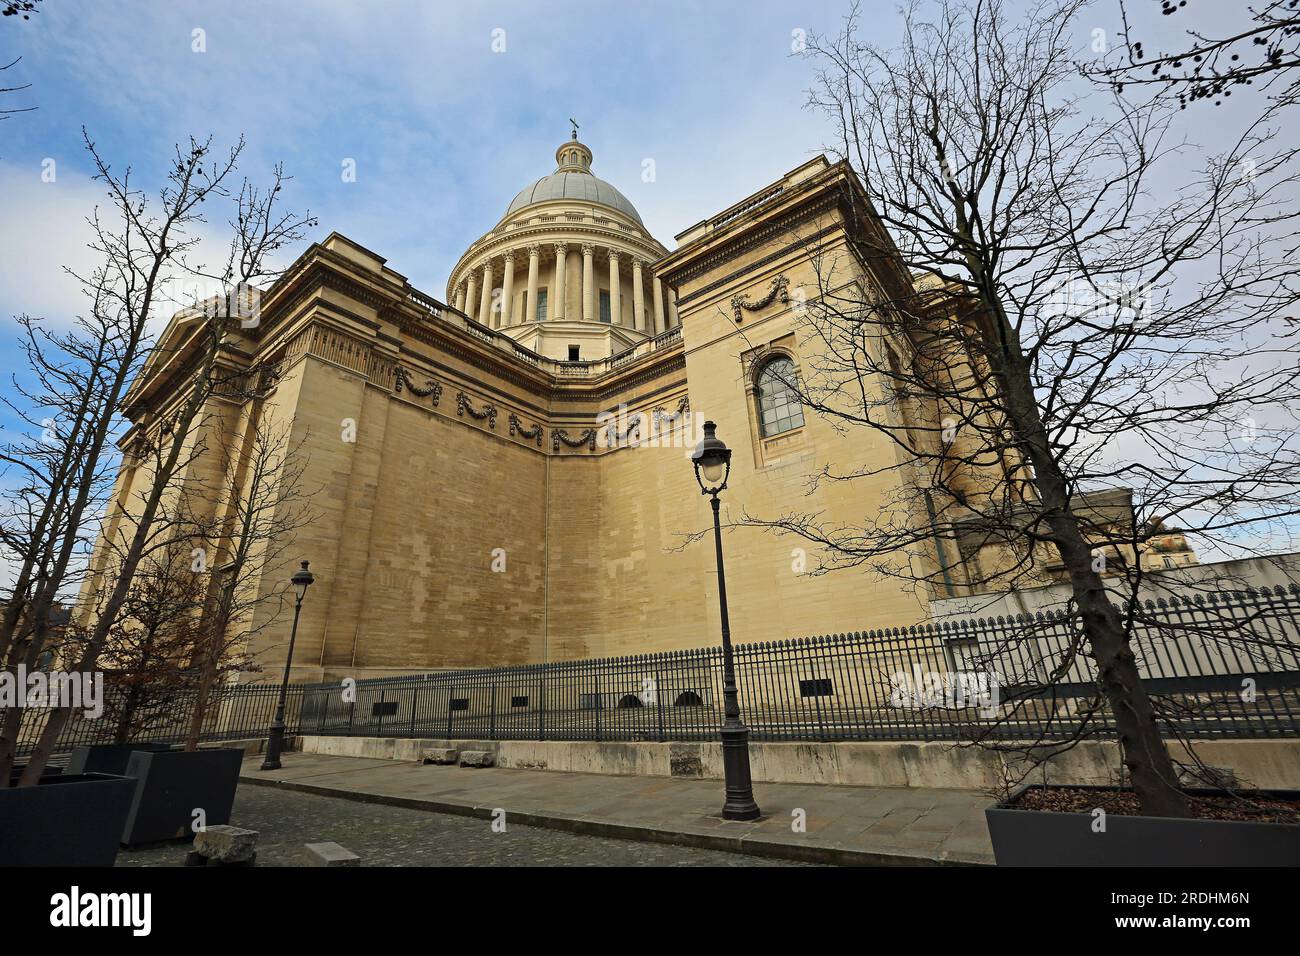 Scenery with the Pantheon - Paris, France Stock Photo